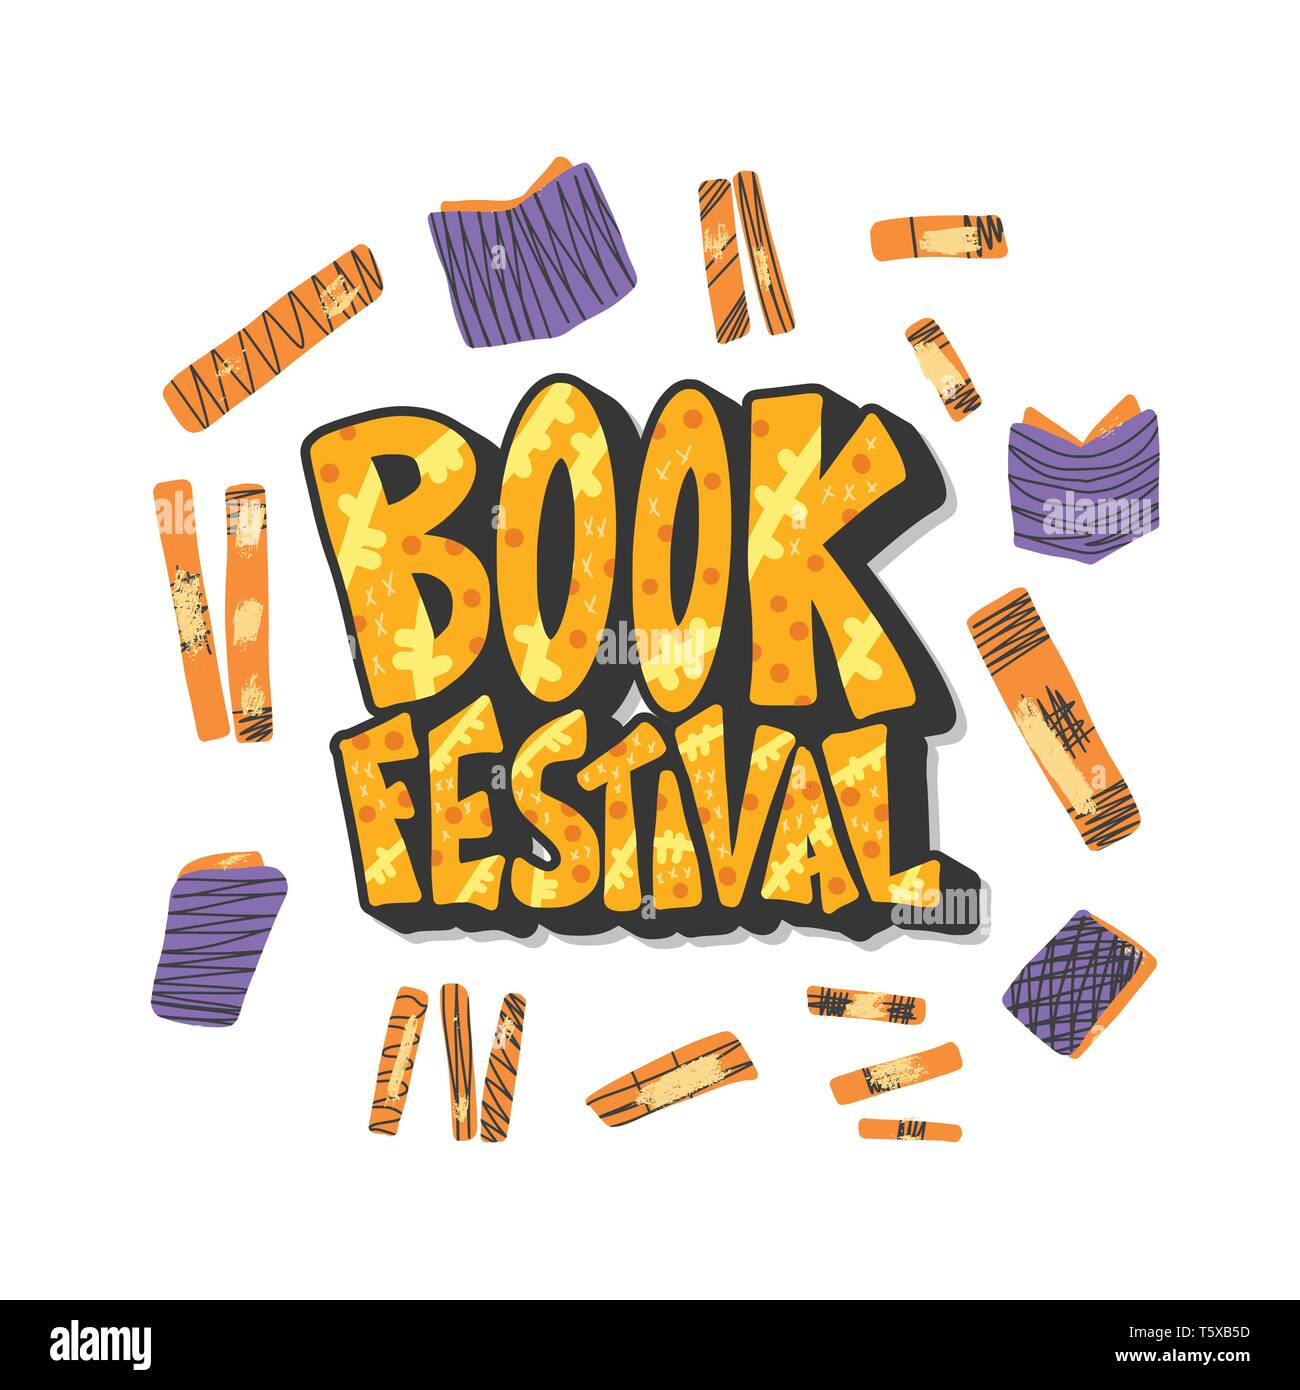 Book festival concept. Book set in doodle style. Symbols of reading